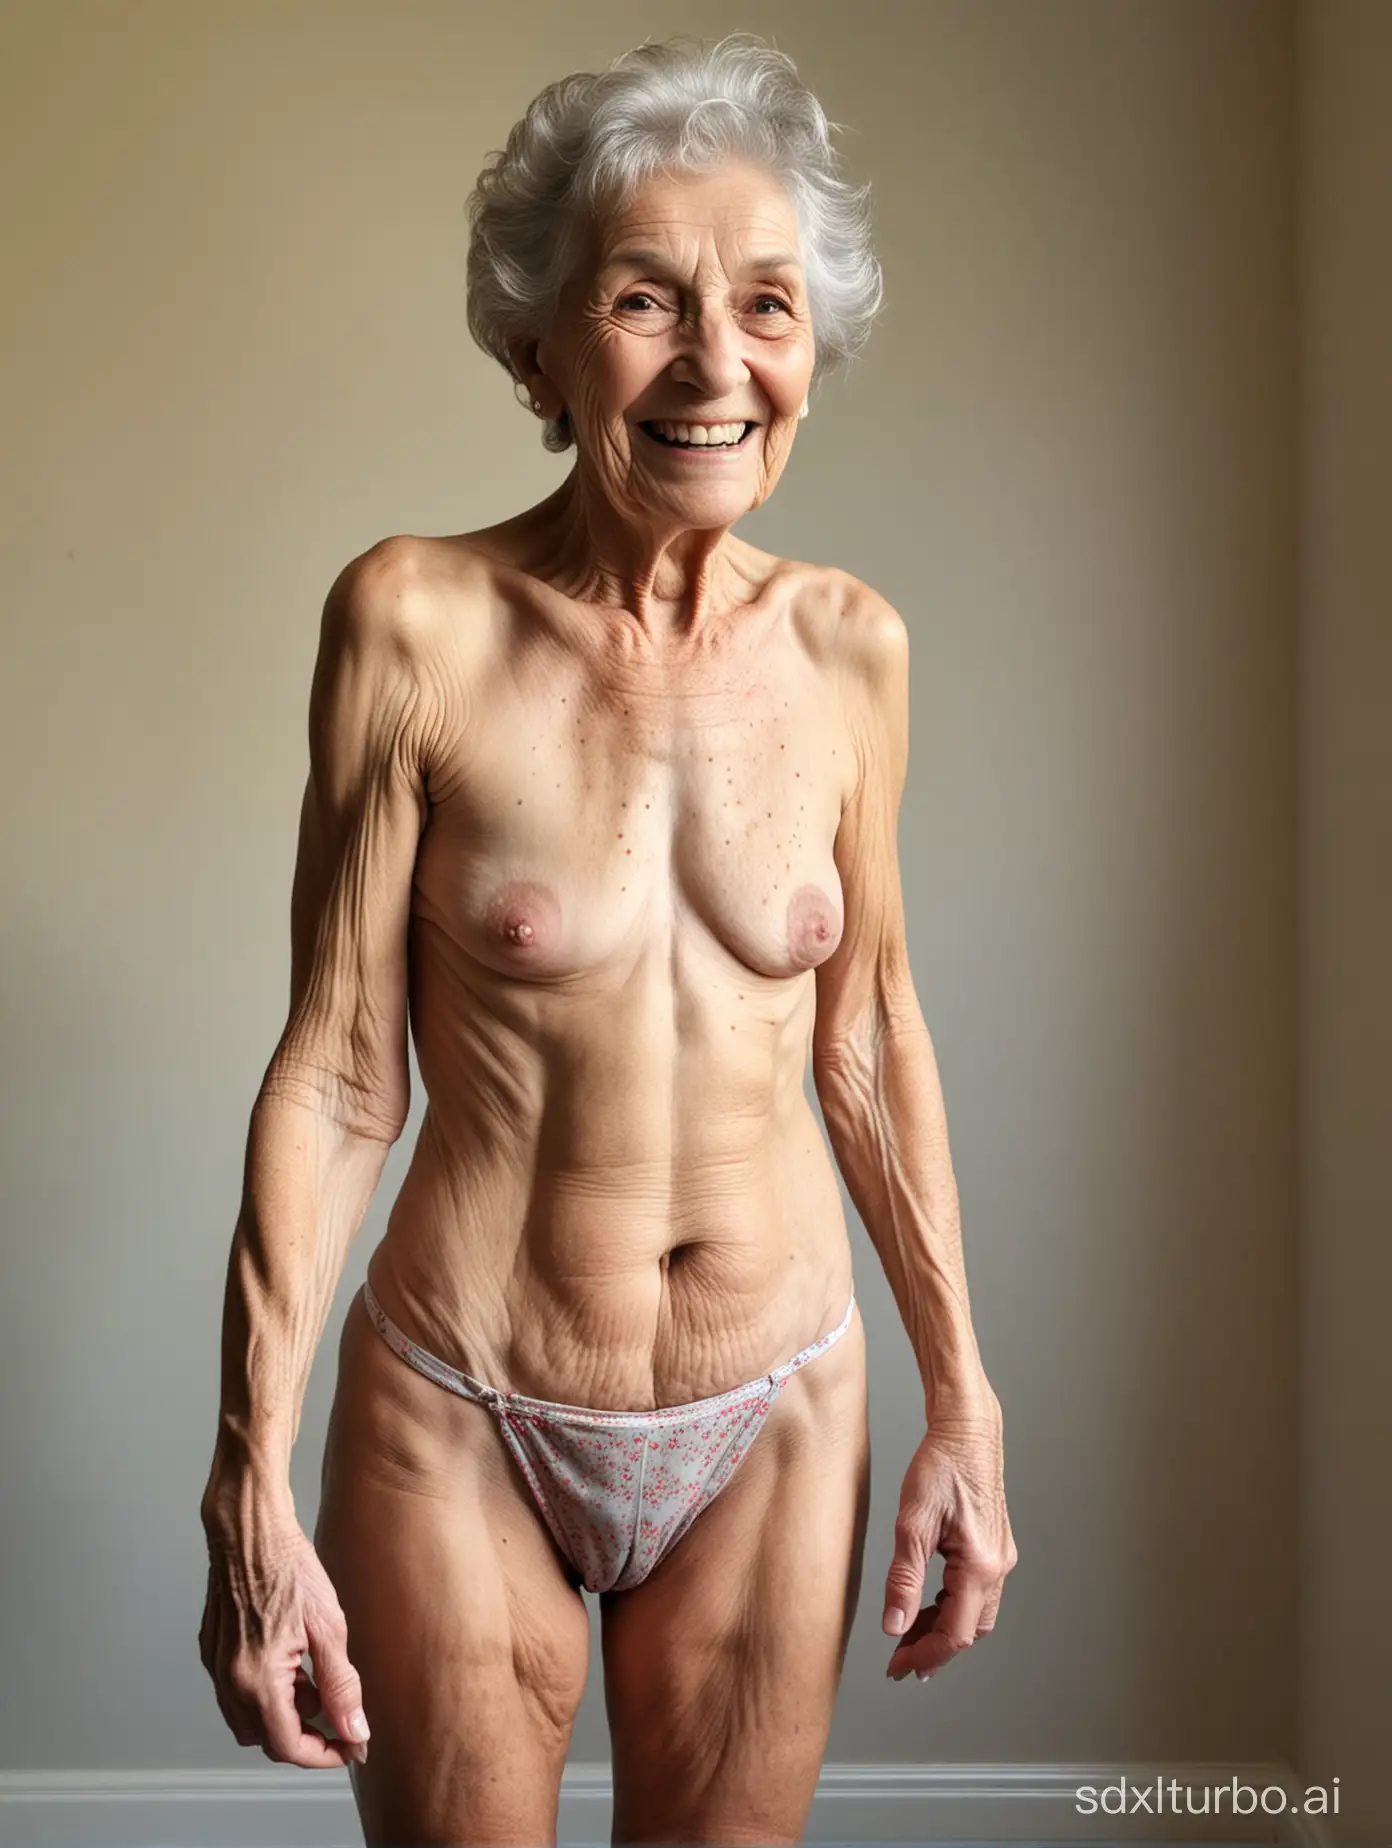 Grinning, 100 year old anorexic elderly grandma stands with her arse exposed.